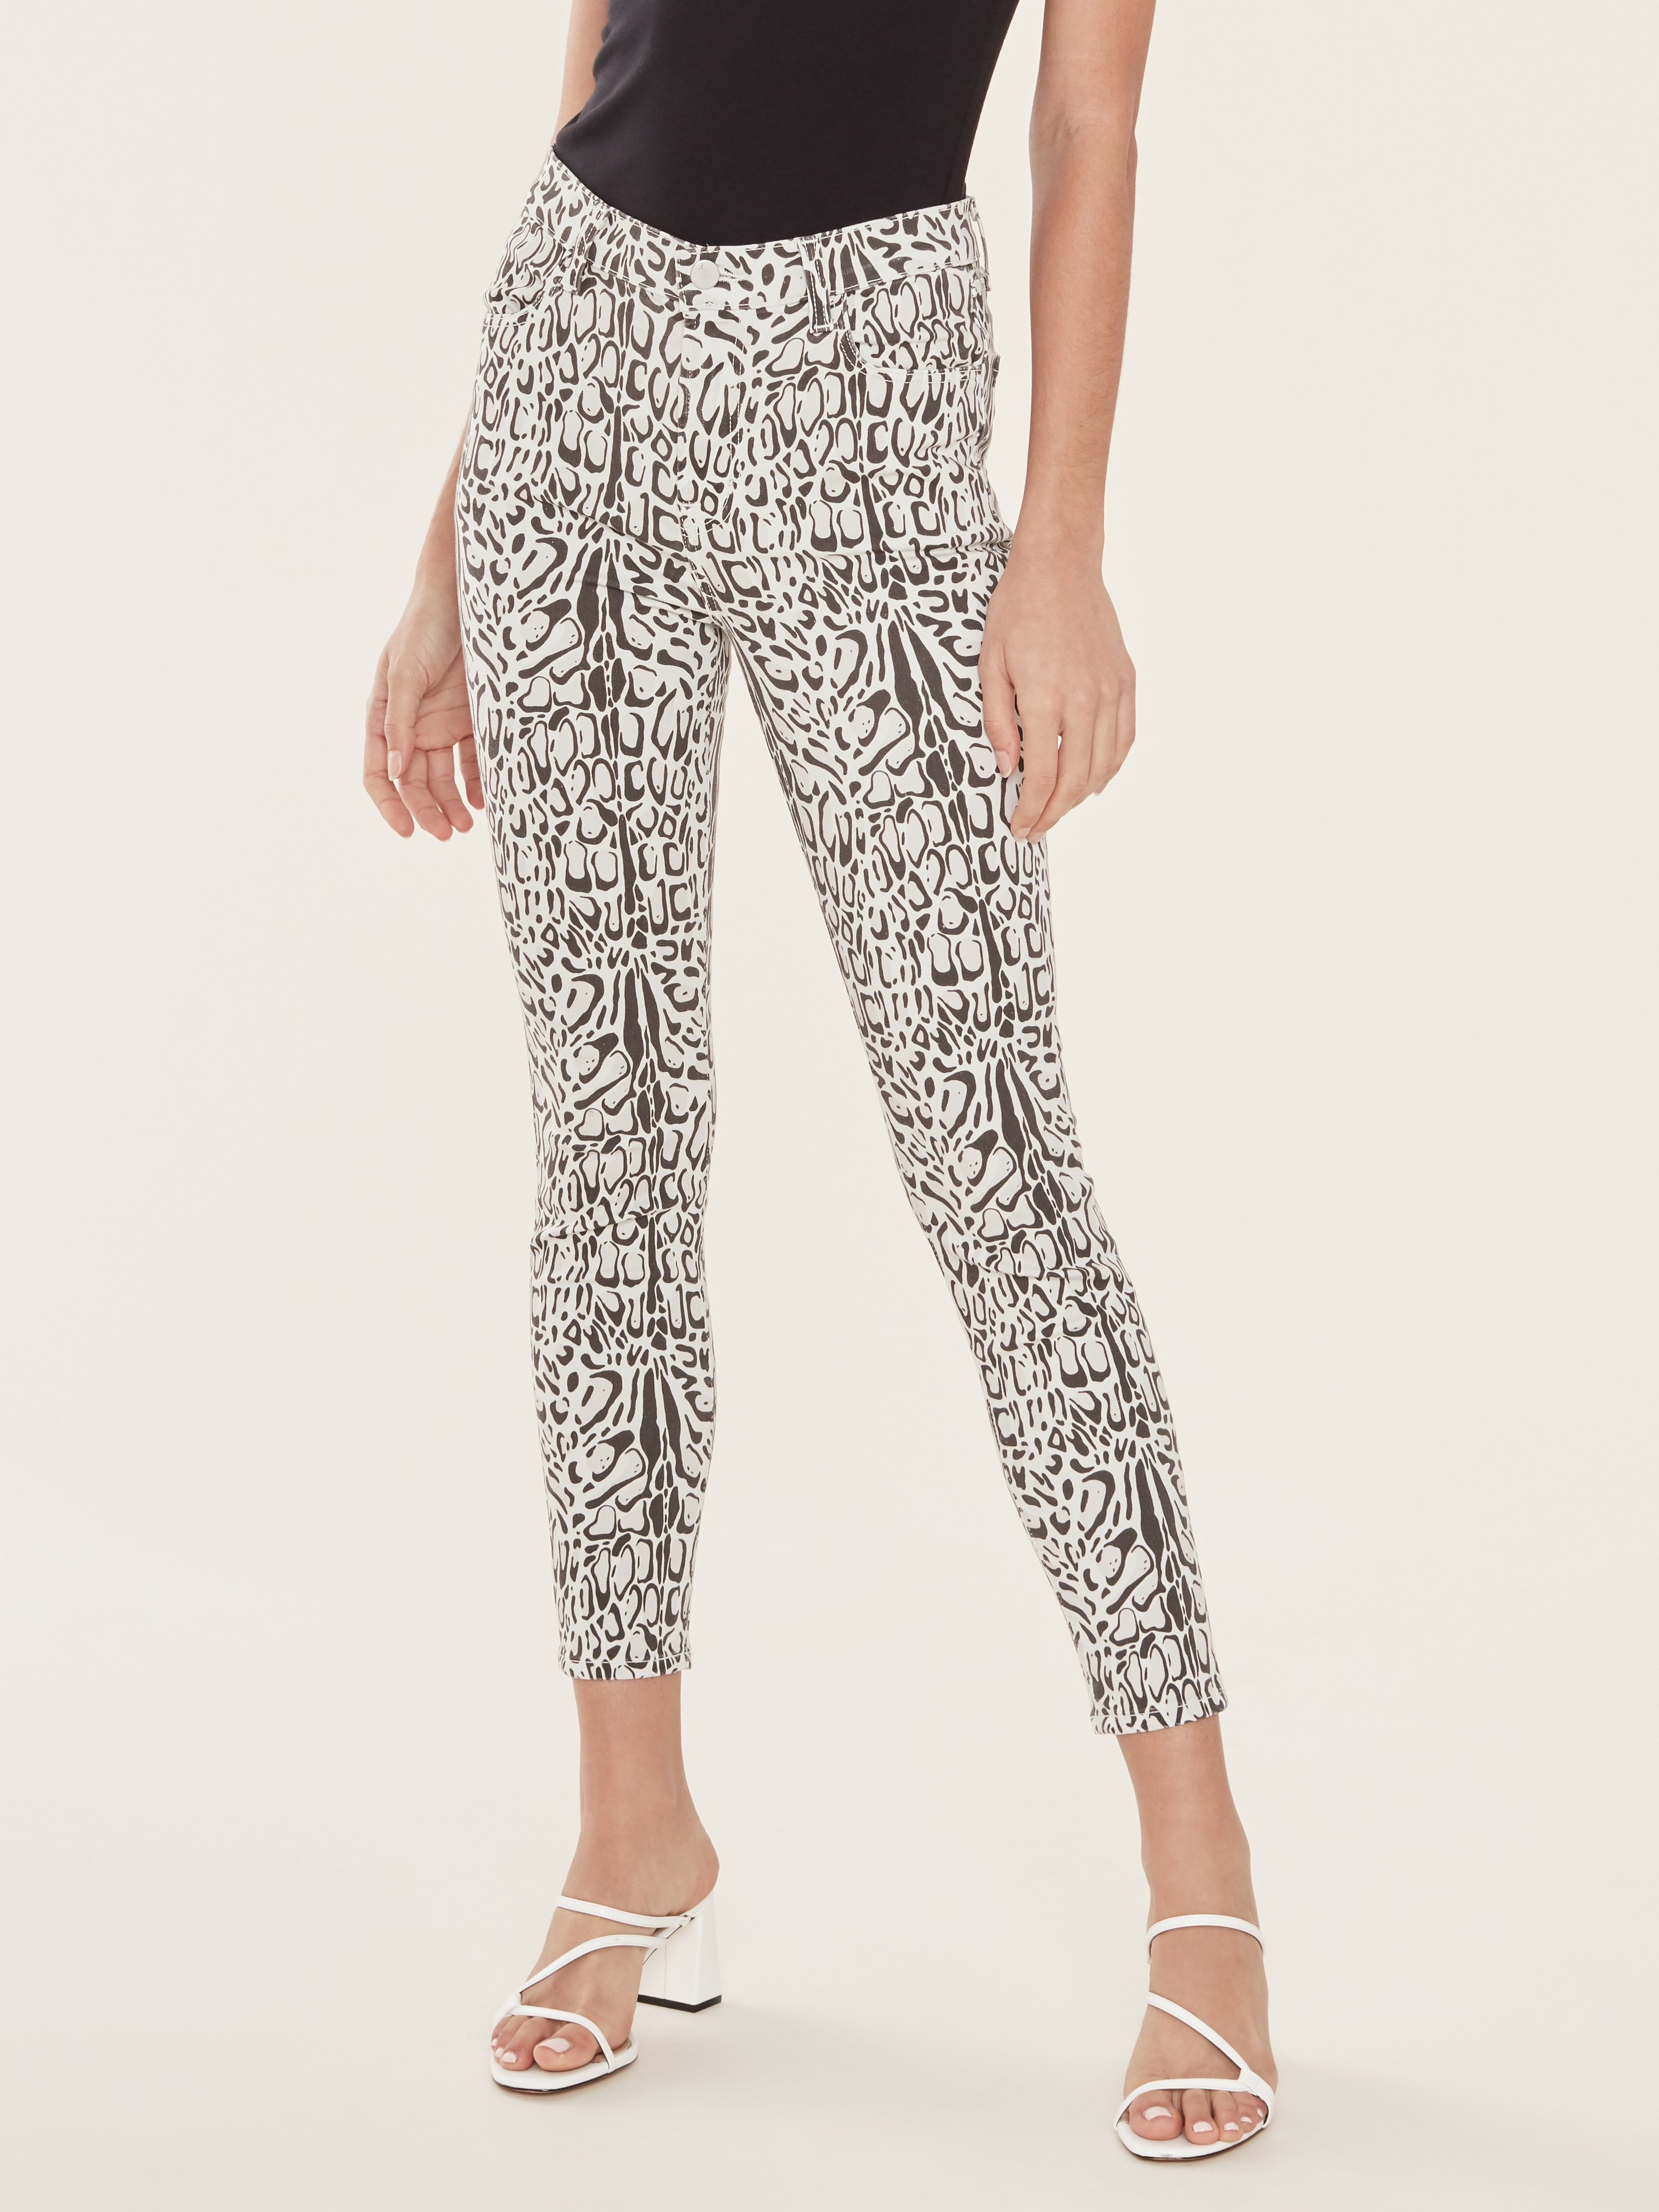 J Brand Alana High Rise Cropped Skinny Jeans In Moonbeam Clouded Leopard